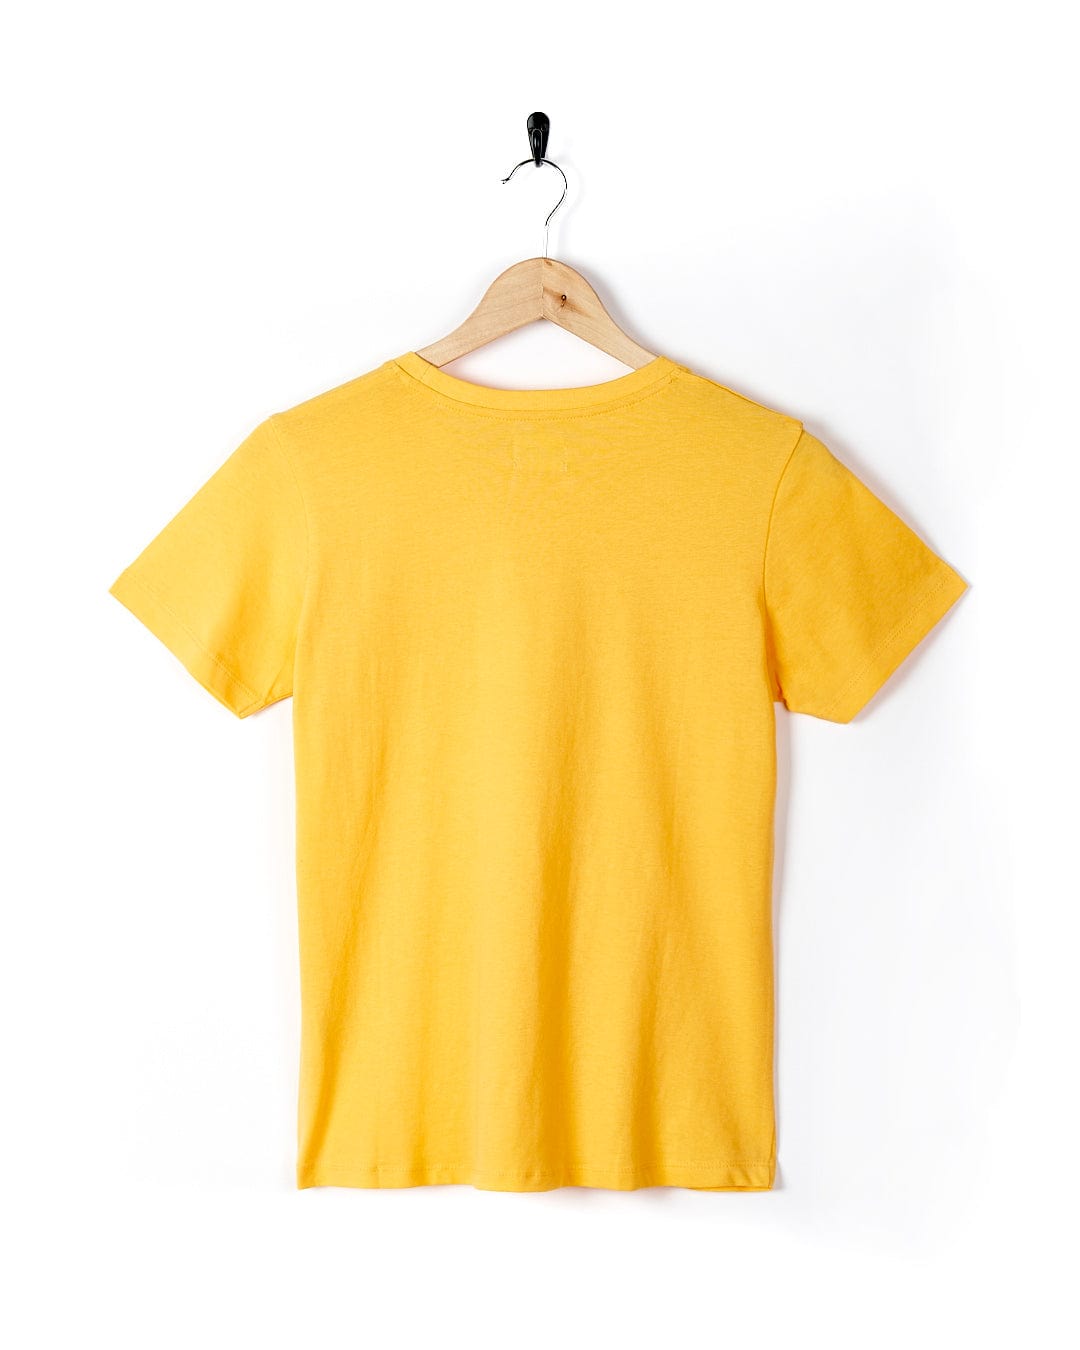 A Saltrock On The Road Wales - Womens Short Sleeve T-Shirt - Yellow hanging on a hanger.